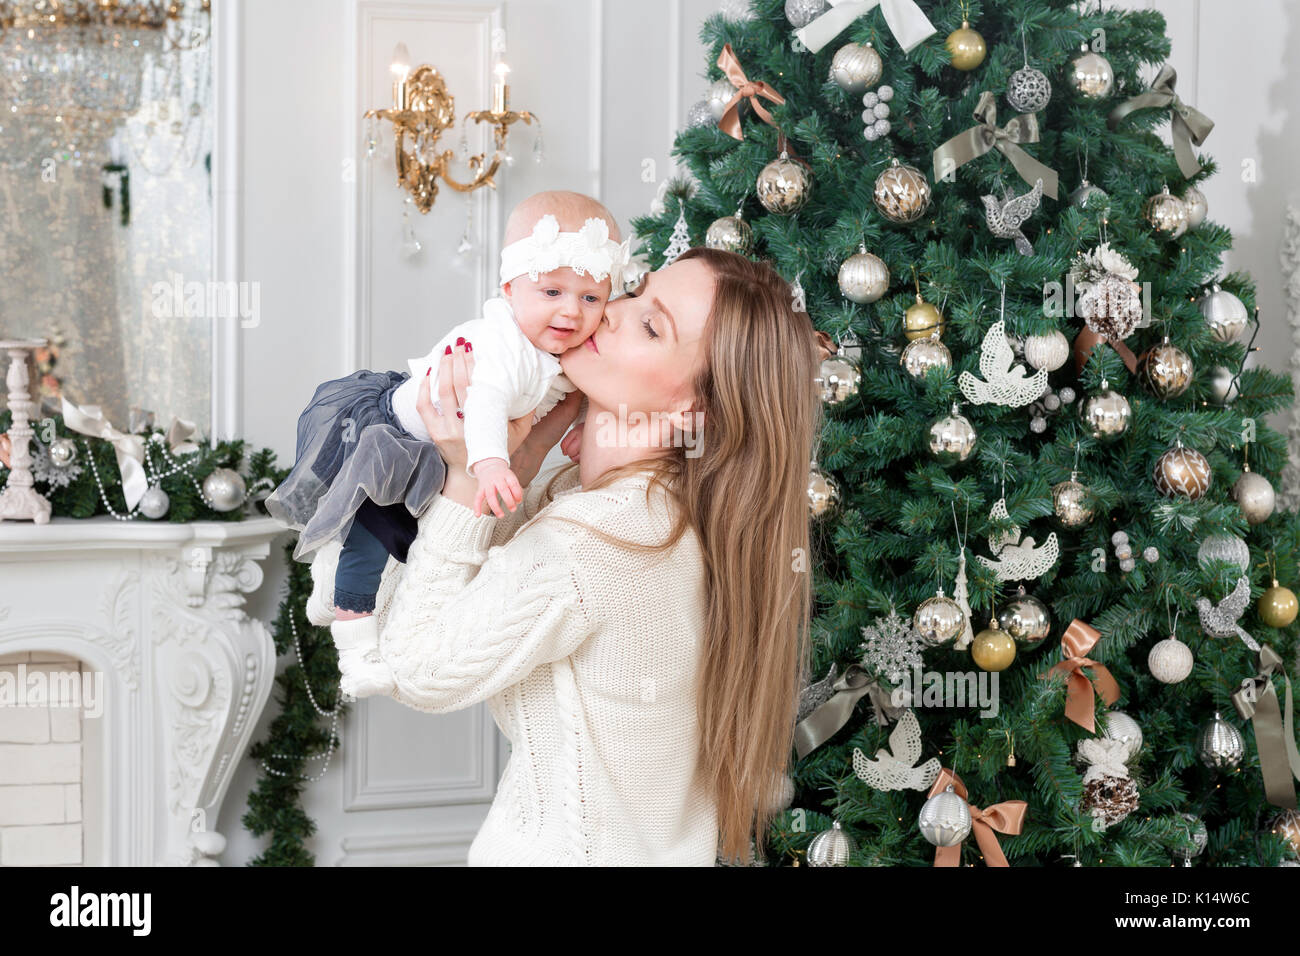 https://c8.alamy.com/comp/K14W6C/happy-young-mom-and-baby-girl-in-christmas-morning-in-home-christmas-K14W6C.jpg